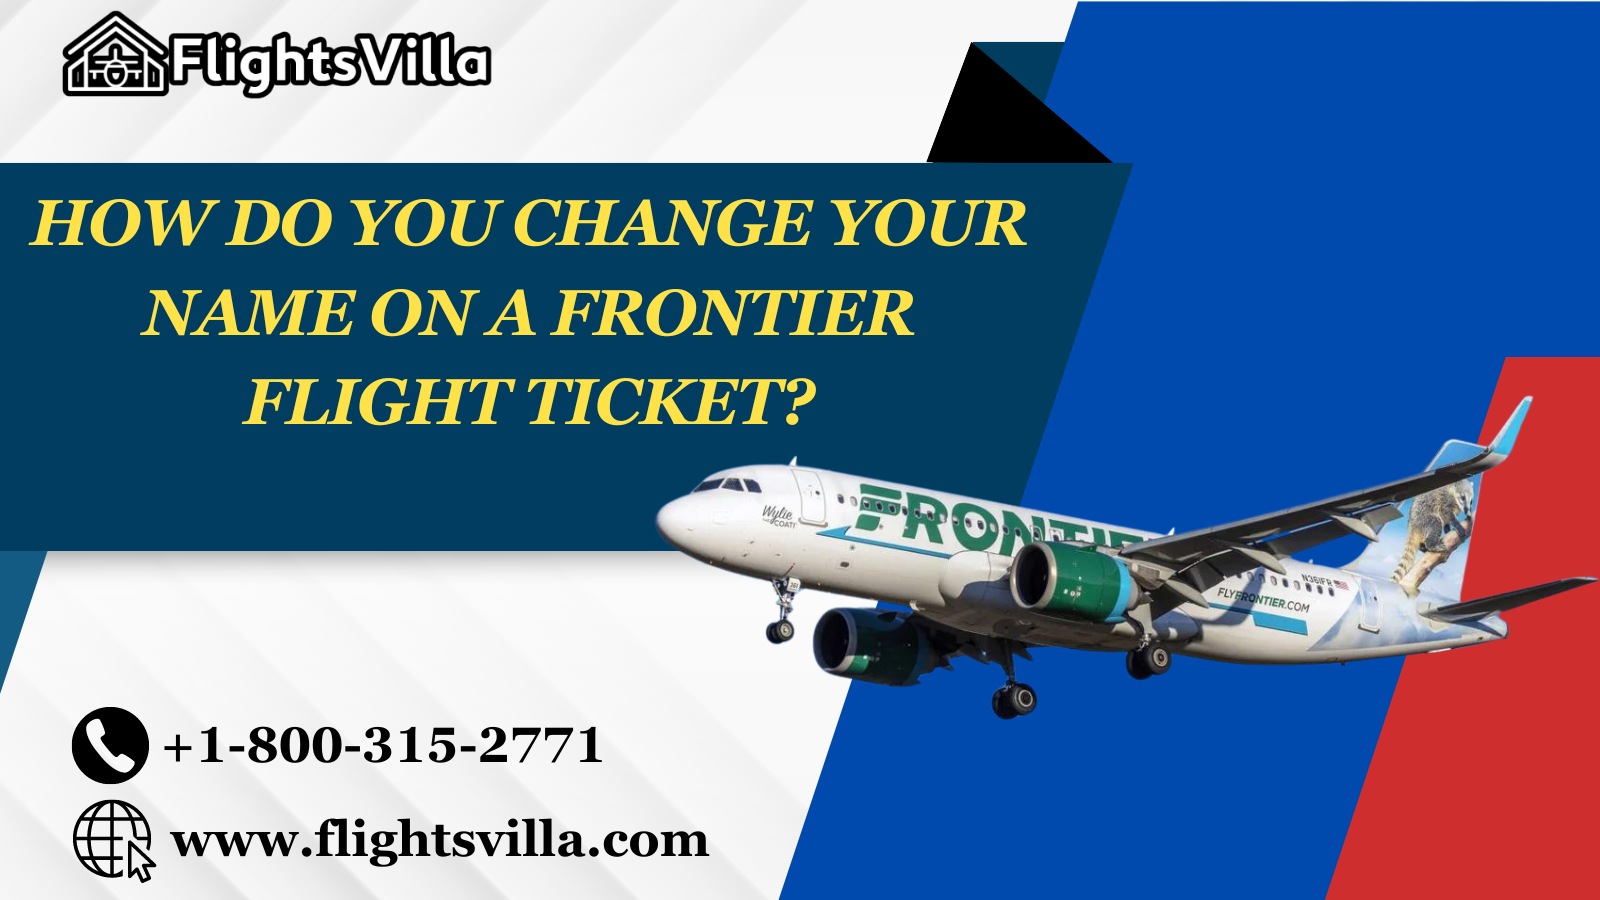 How Do You Change Your Name on a Frontier Flight Ticket